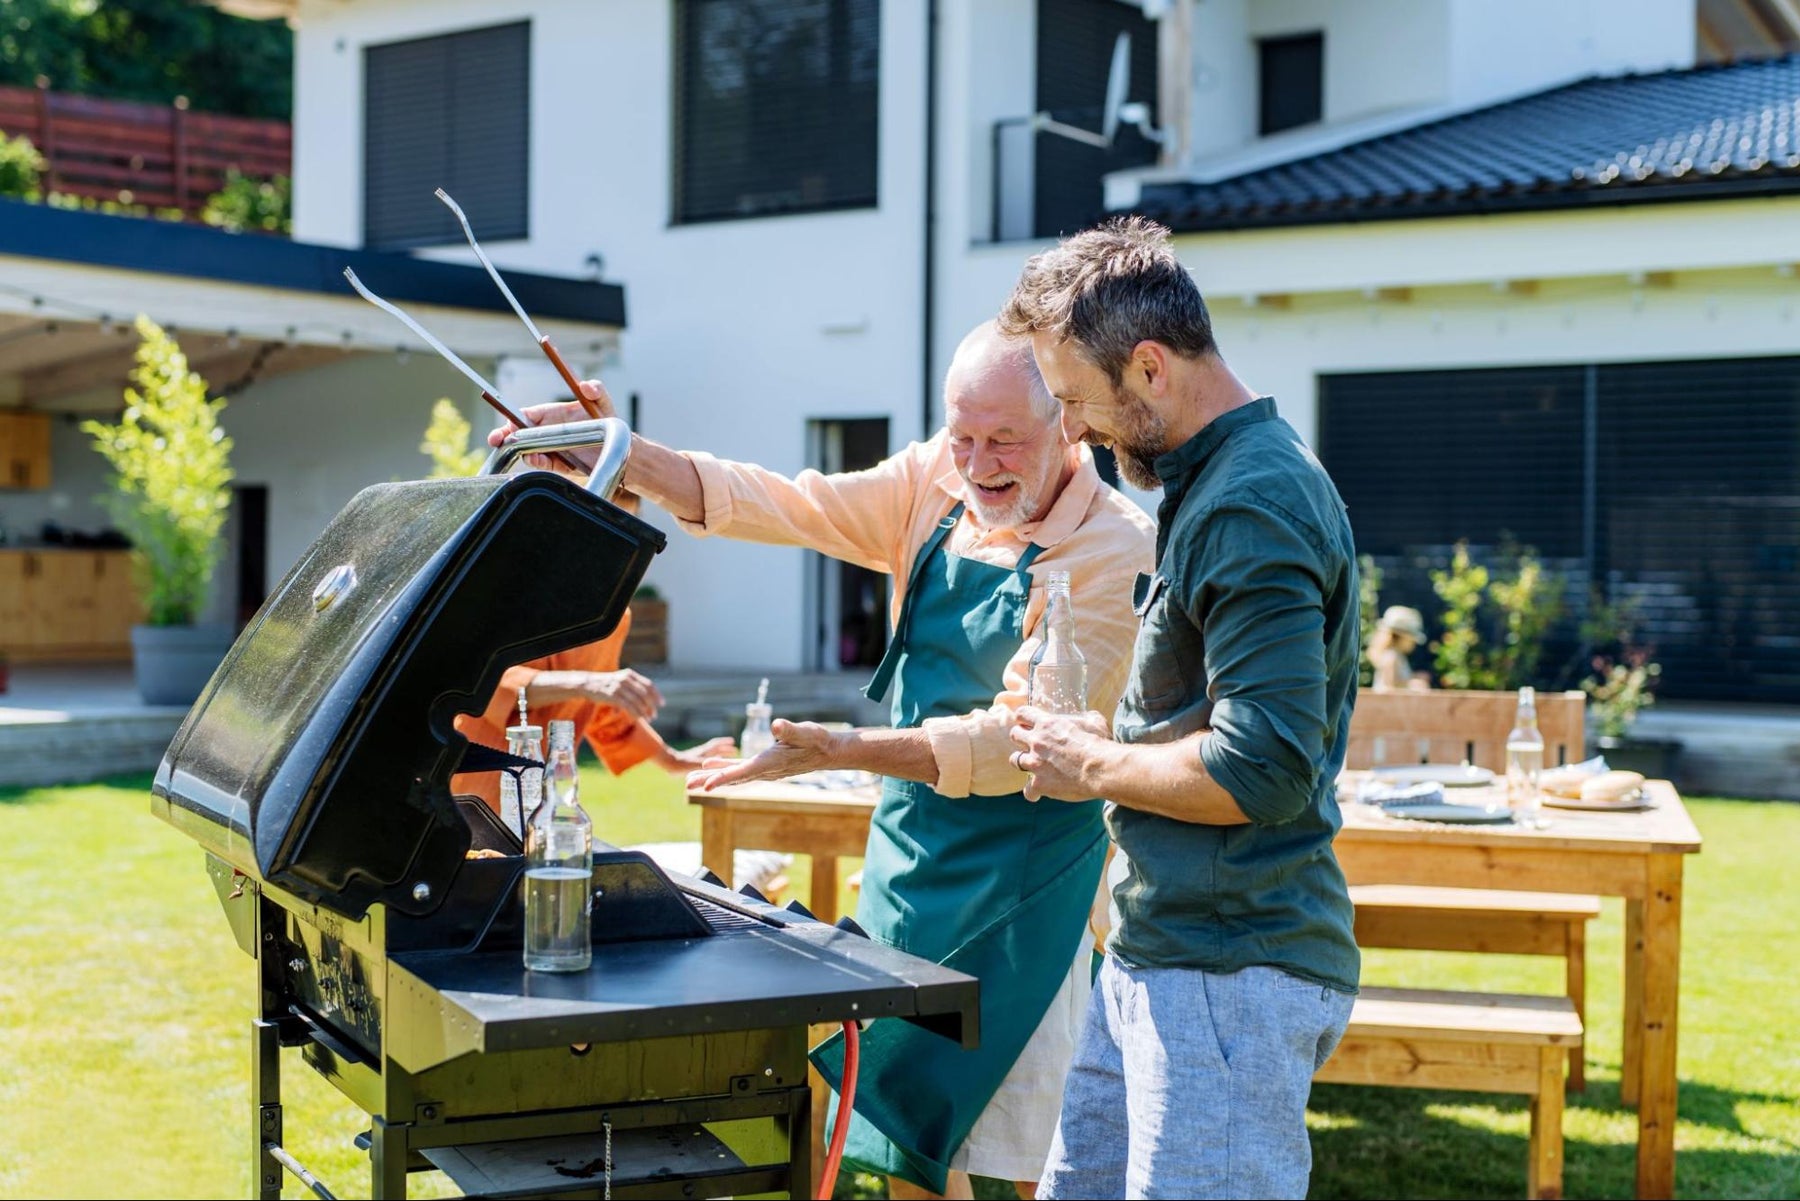 A father showing off the grill to their son